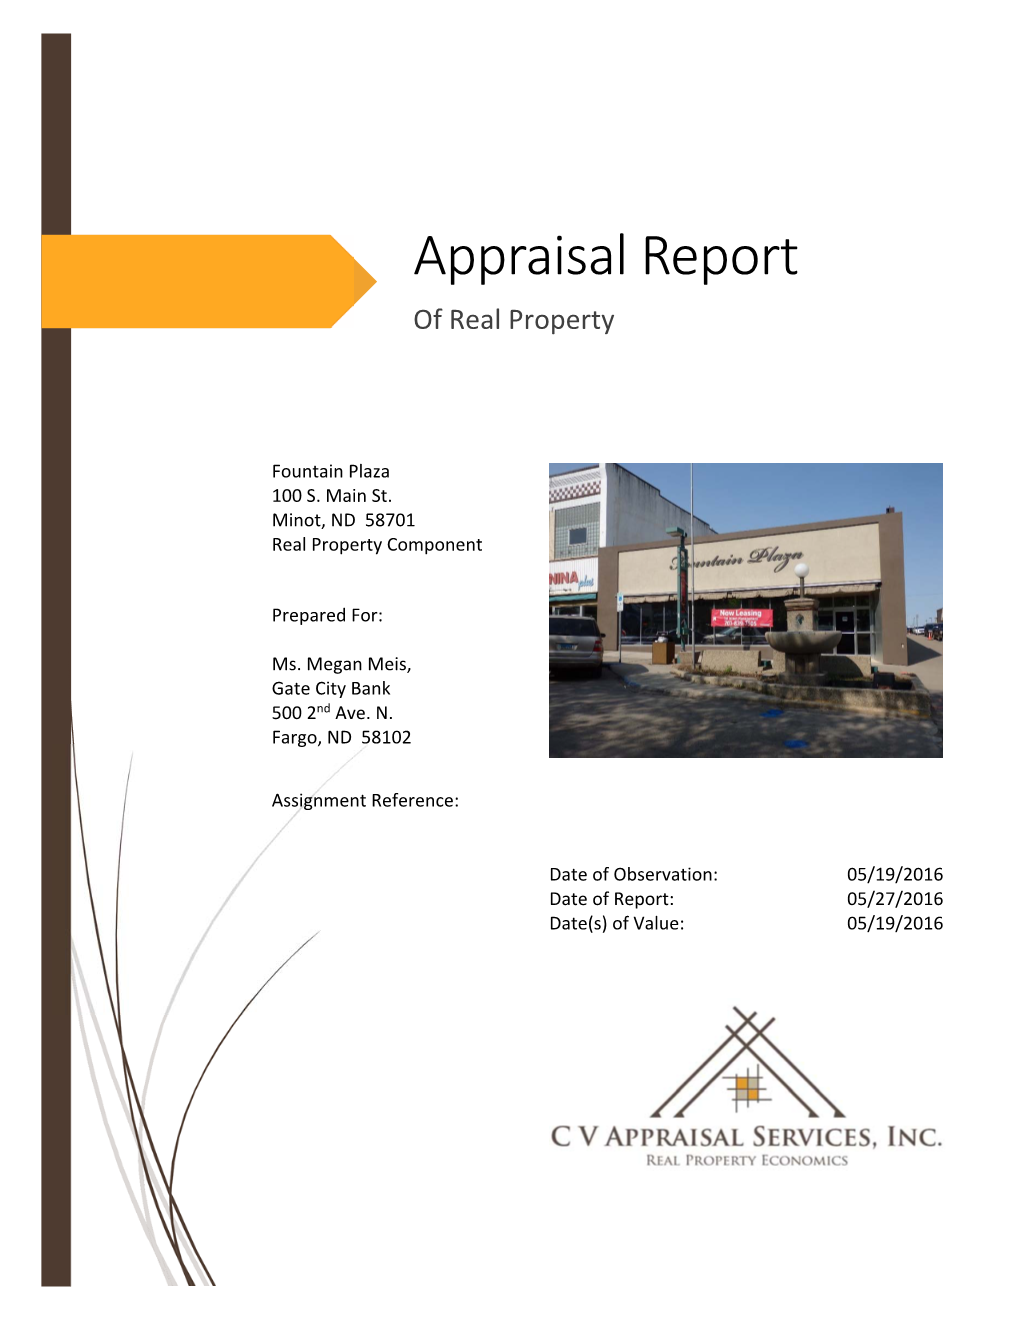 Appraisal Report of Real Property